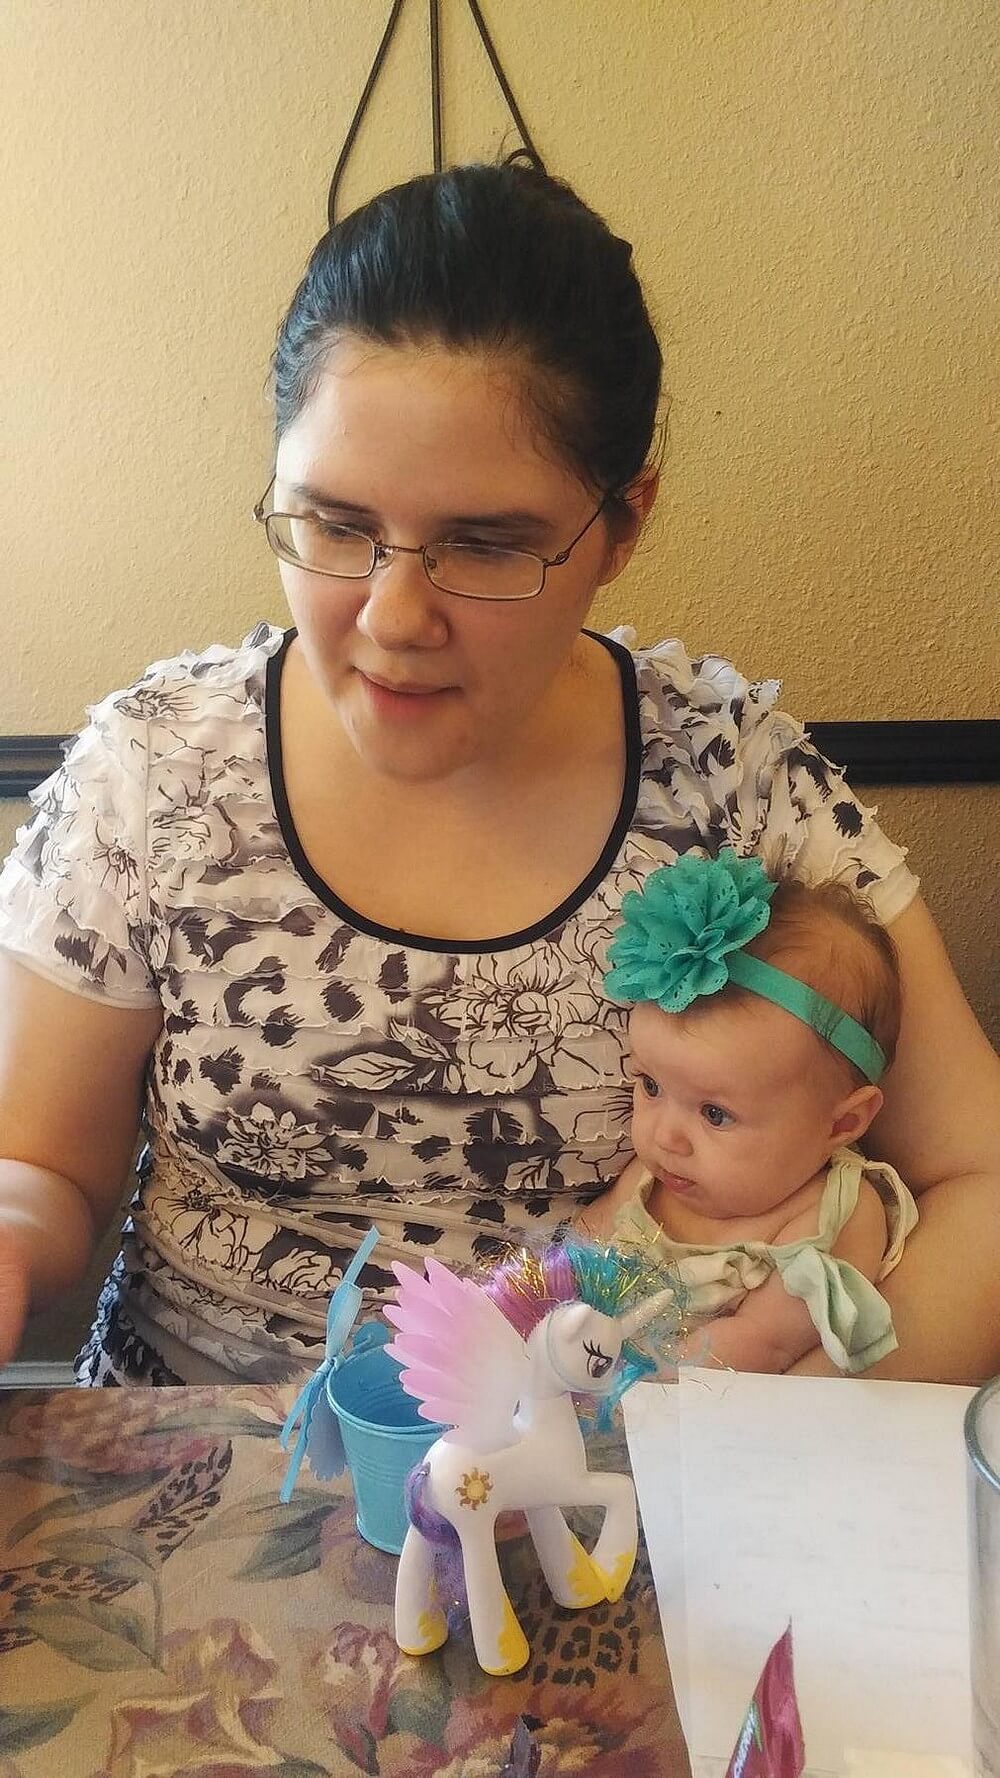 Candid photo of my cousin Solara and I at our cousin's baby shower